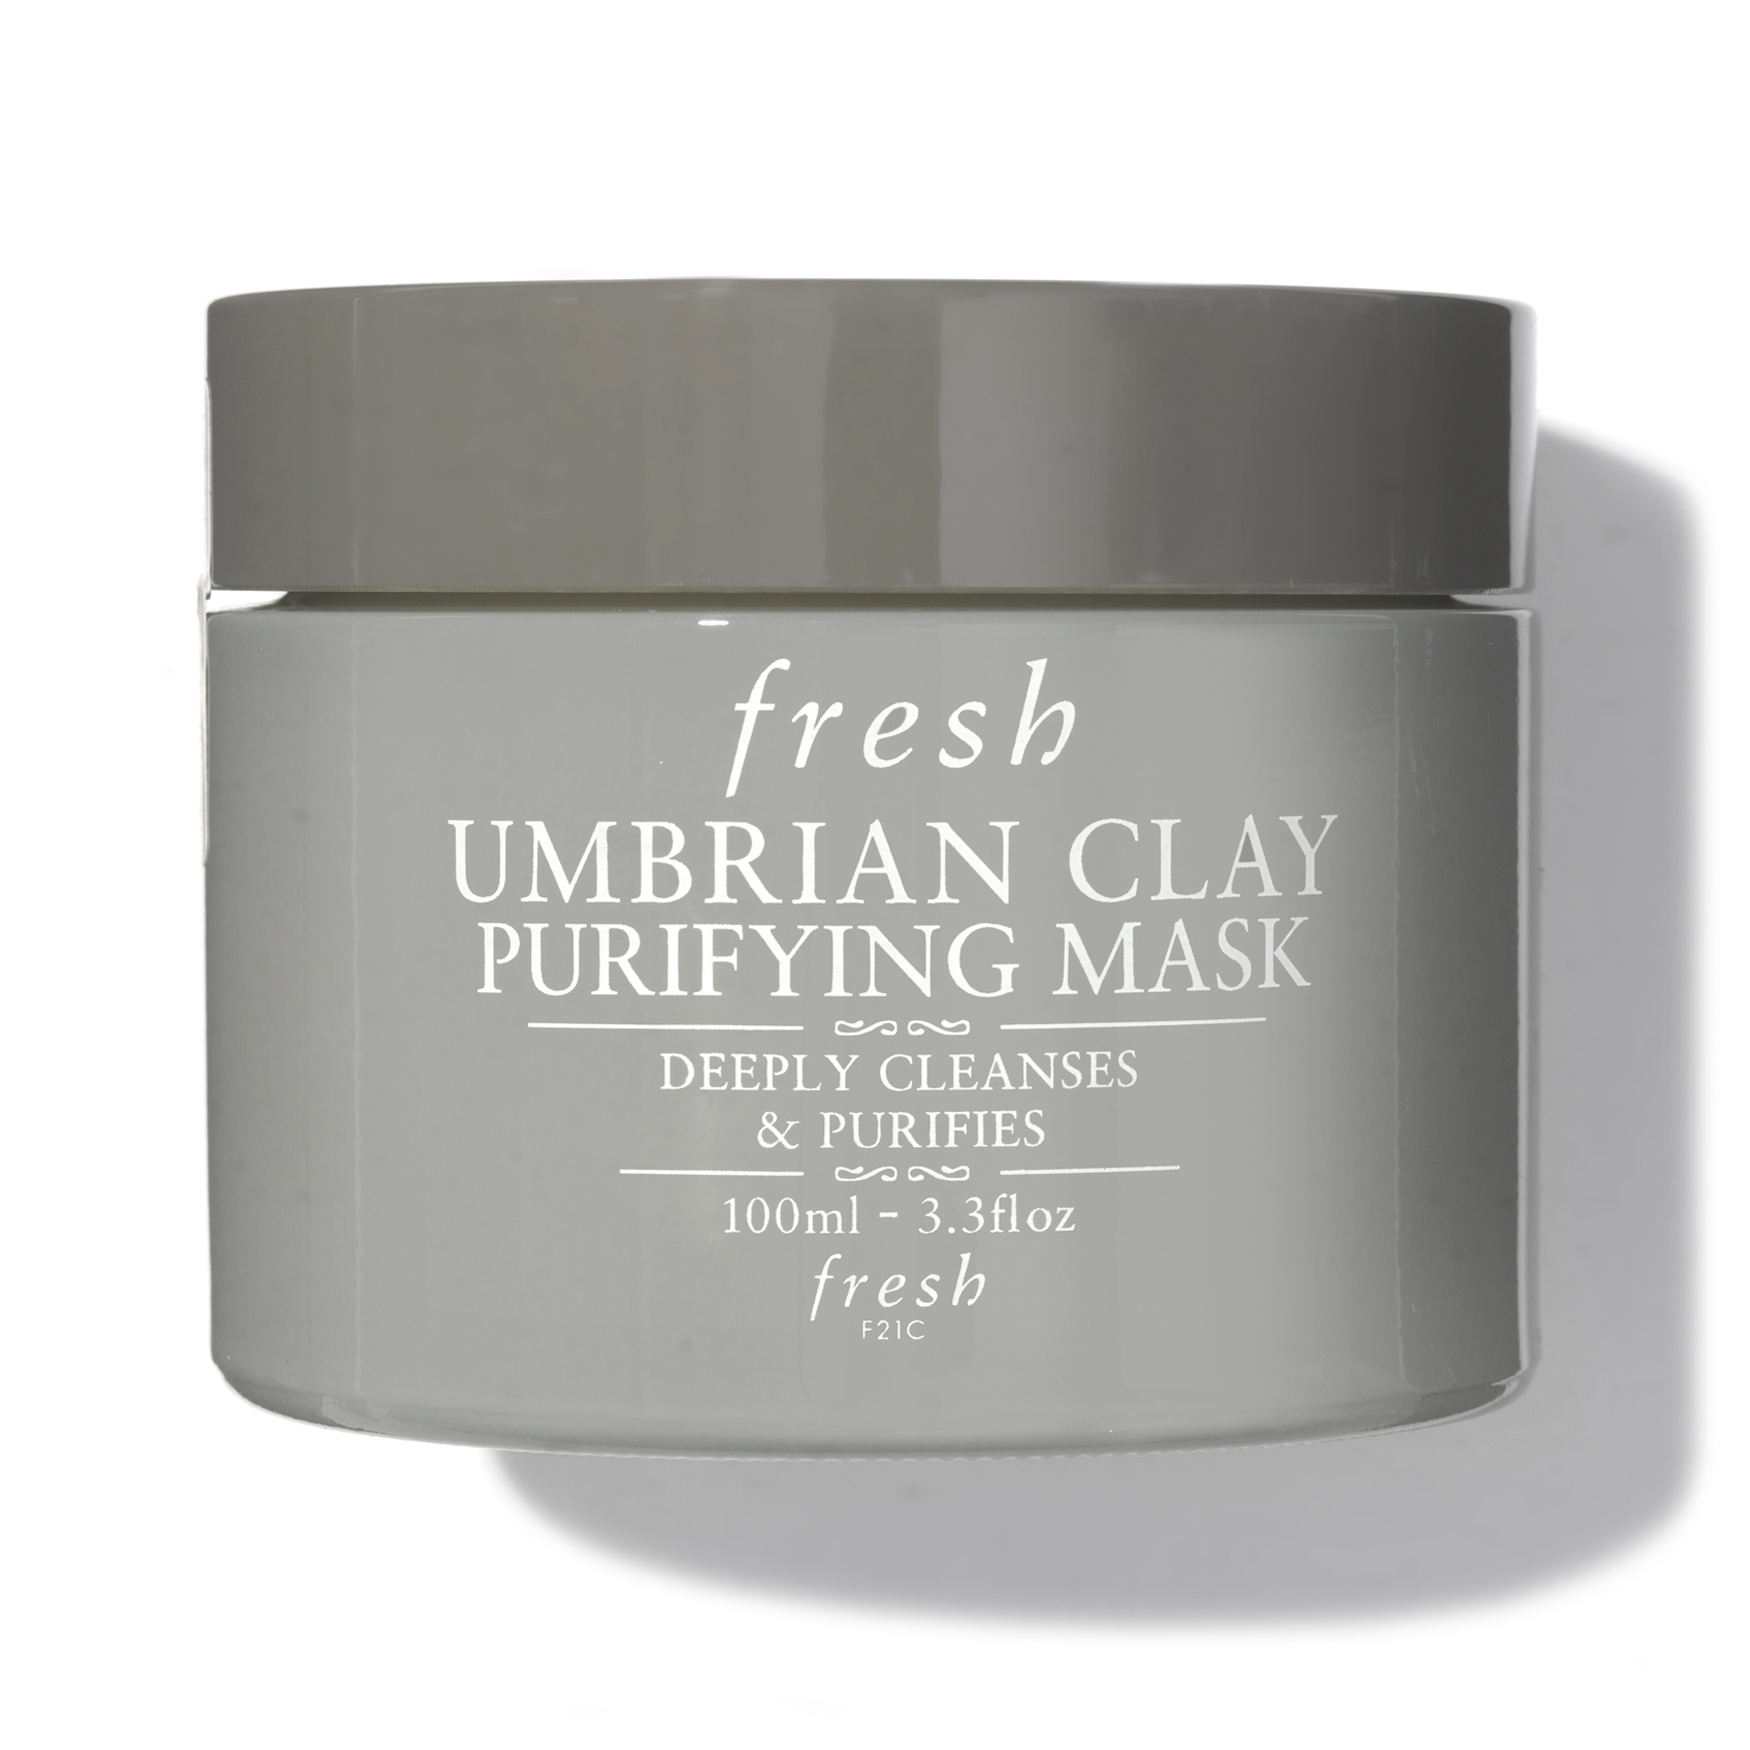 Purifying Clay Masque. Purifying Clay Mask Virta med. Douglas collection Purifying Clay Cream |. Darling Kaolin Gelato bouncy Clay Purifying Mask.